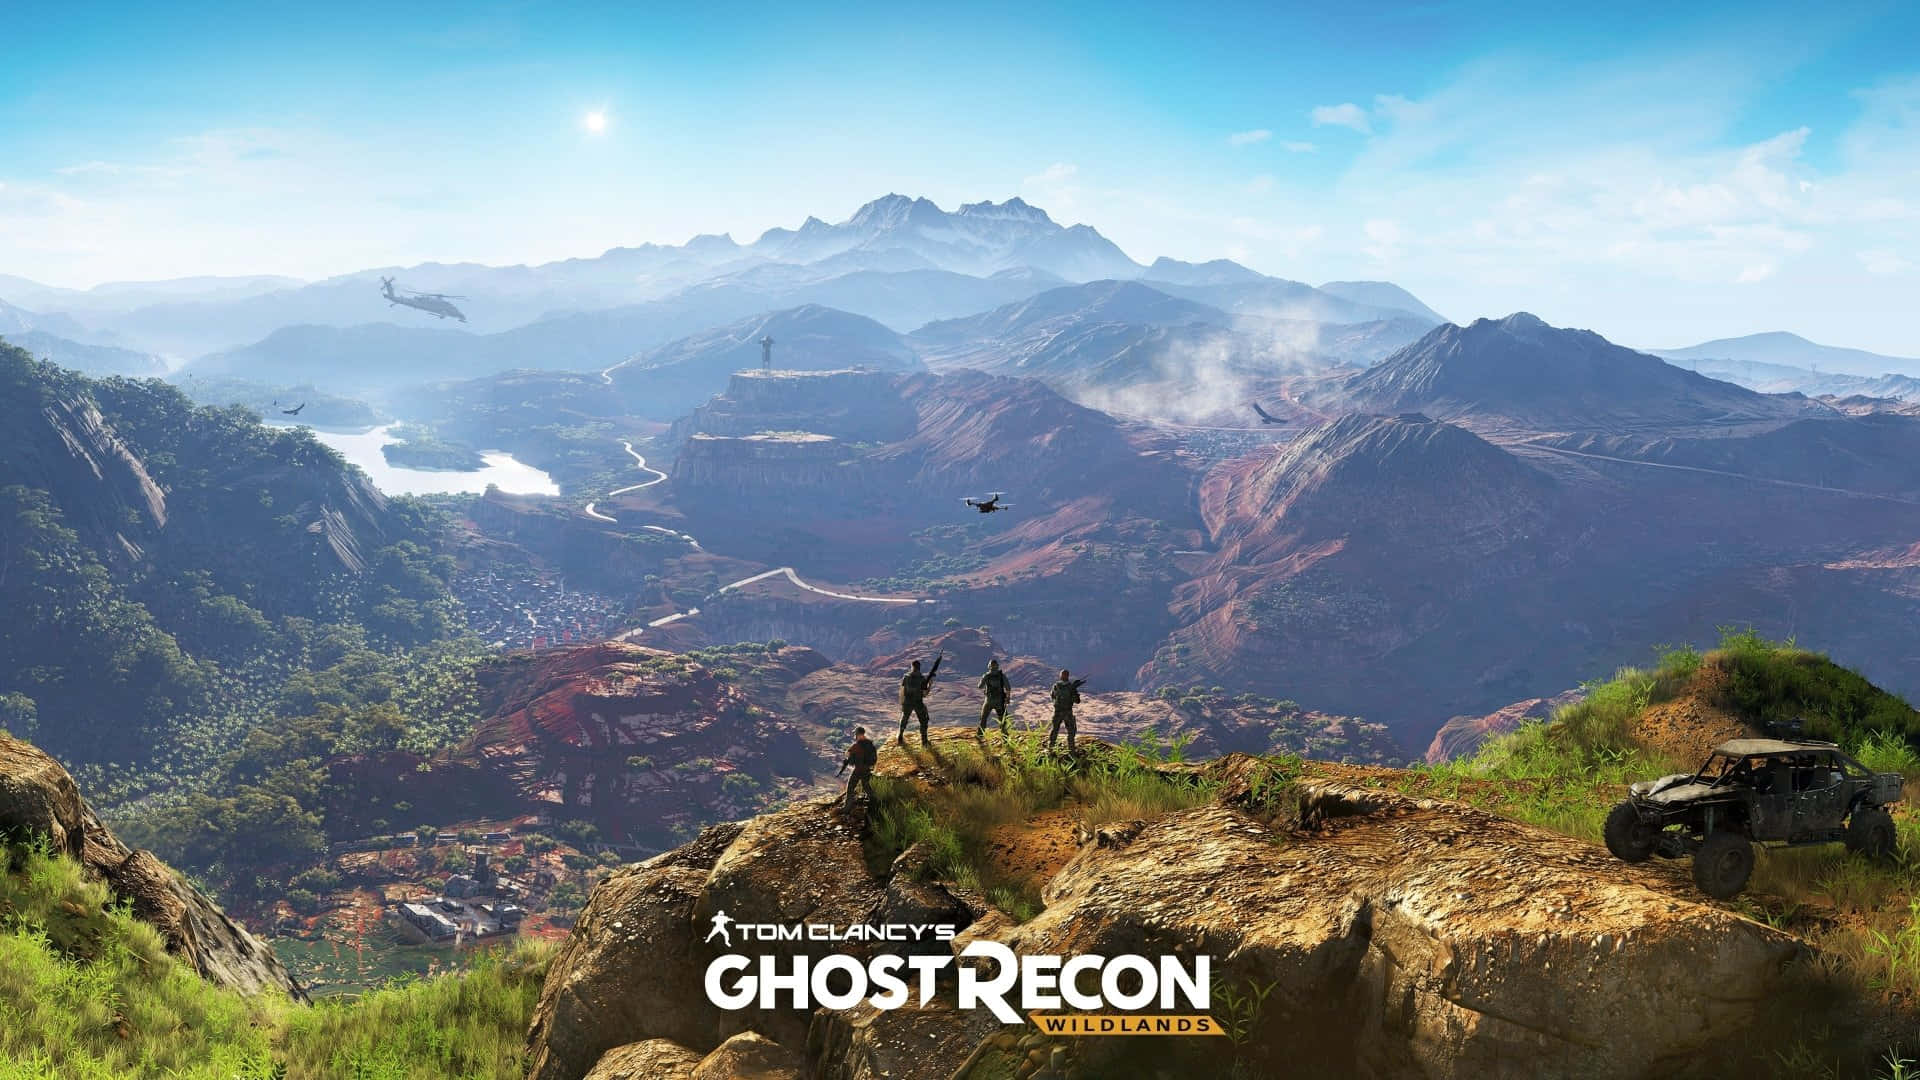 Hd Ghost Recon Wildlands Background Squad On Top Of A Mountain